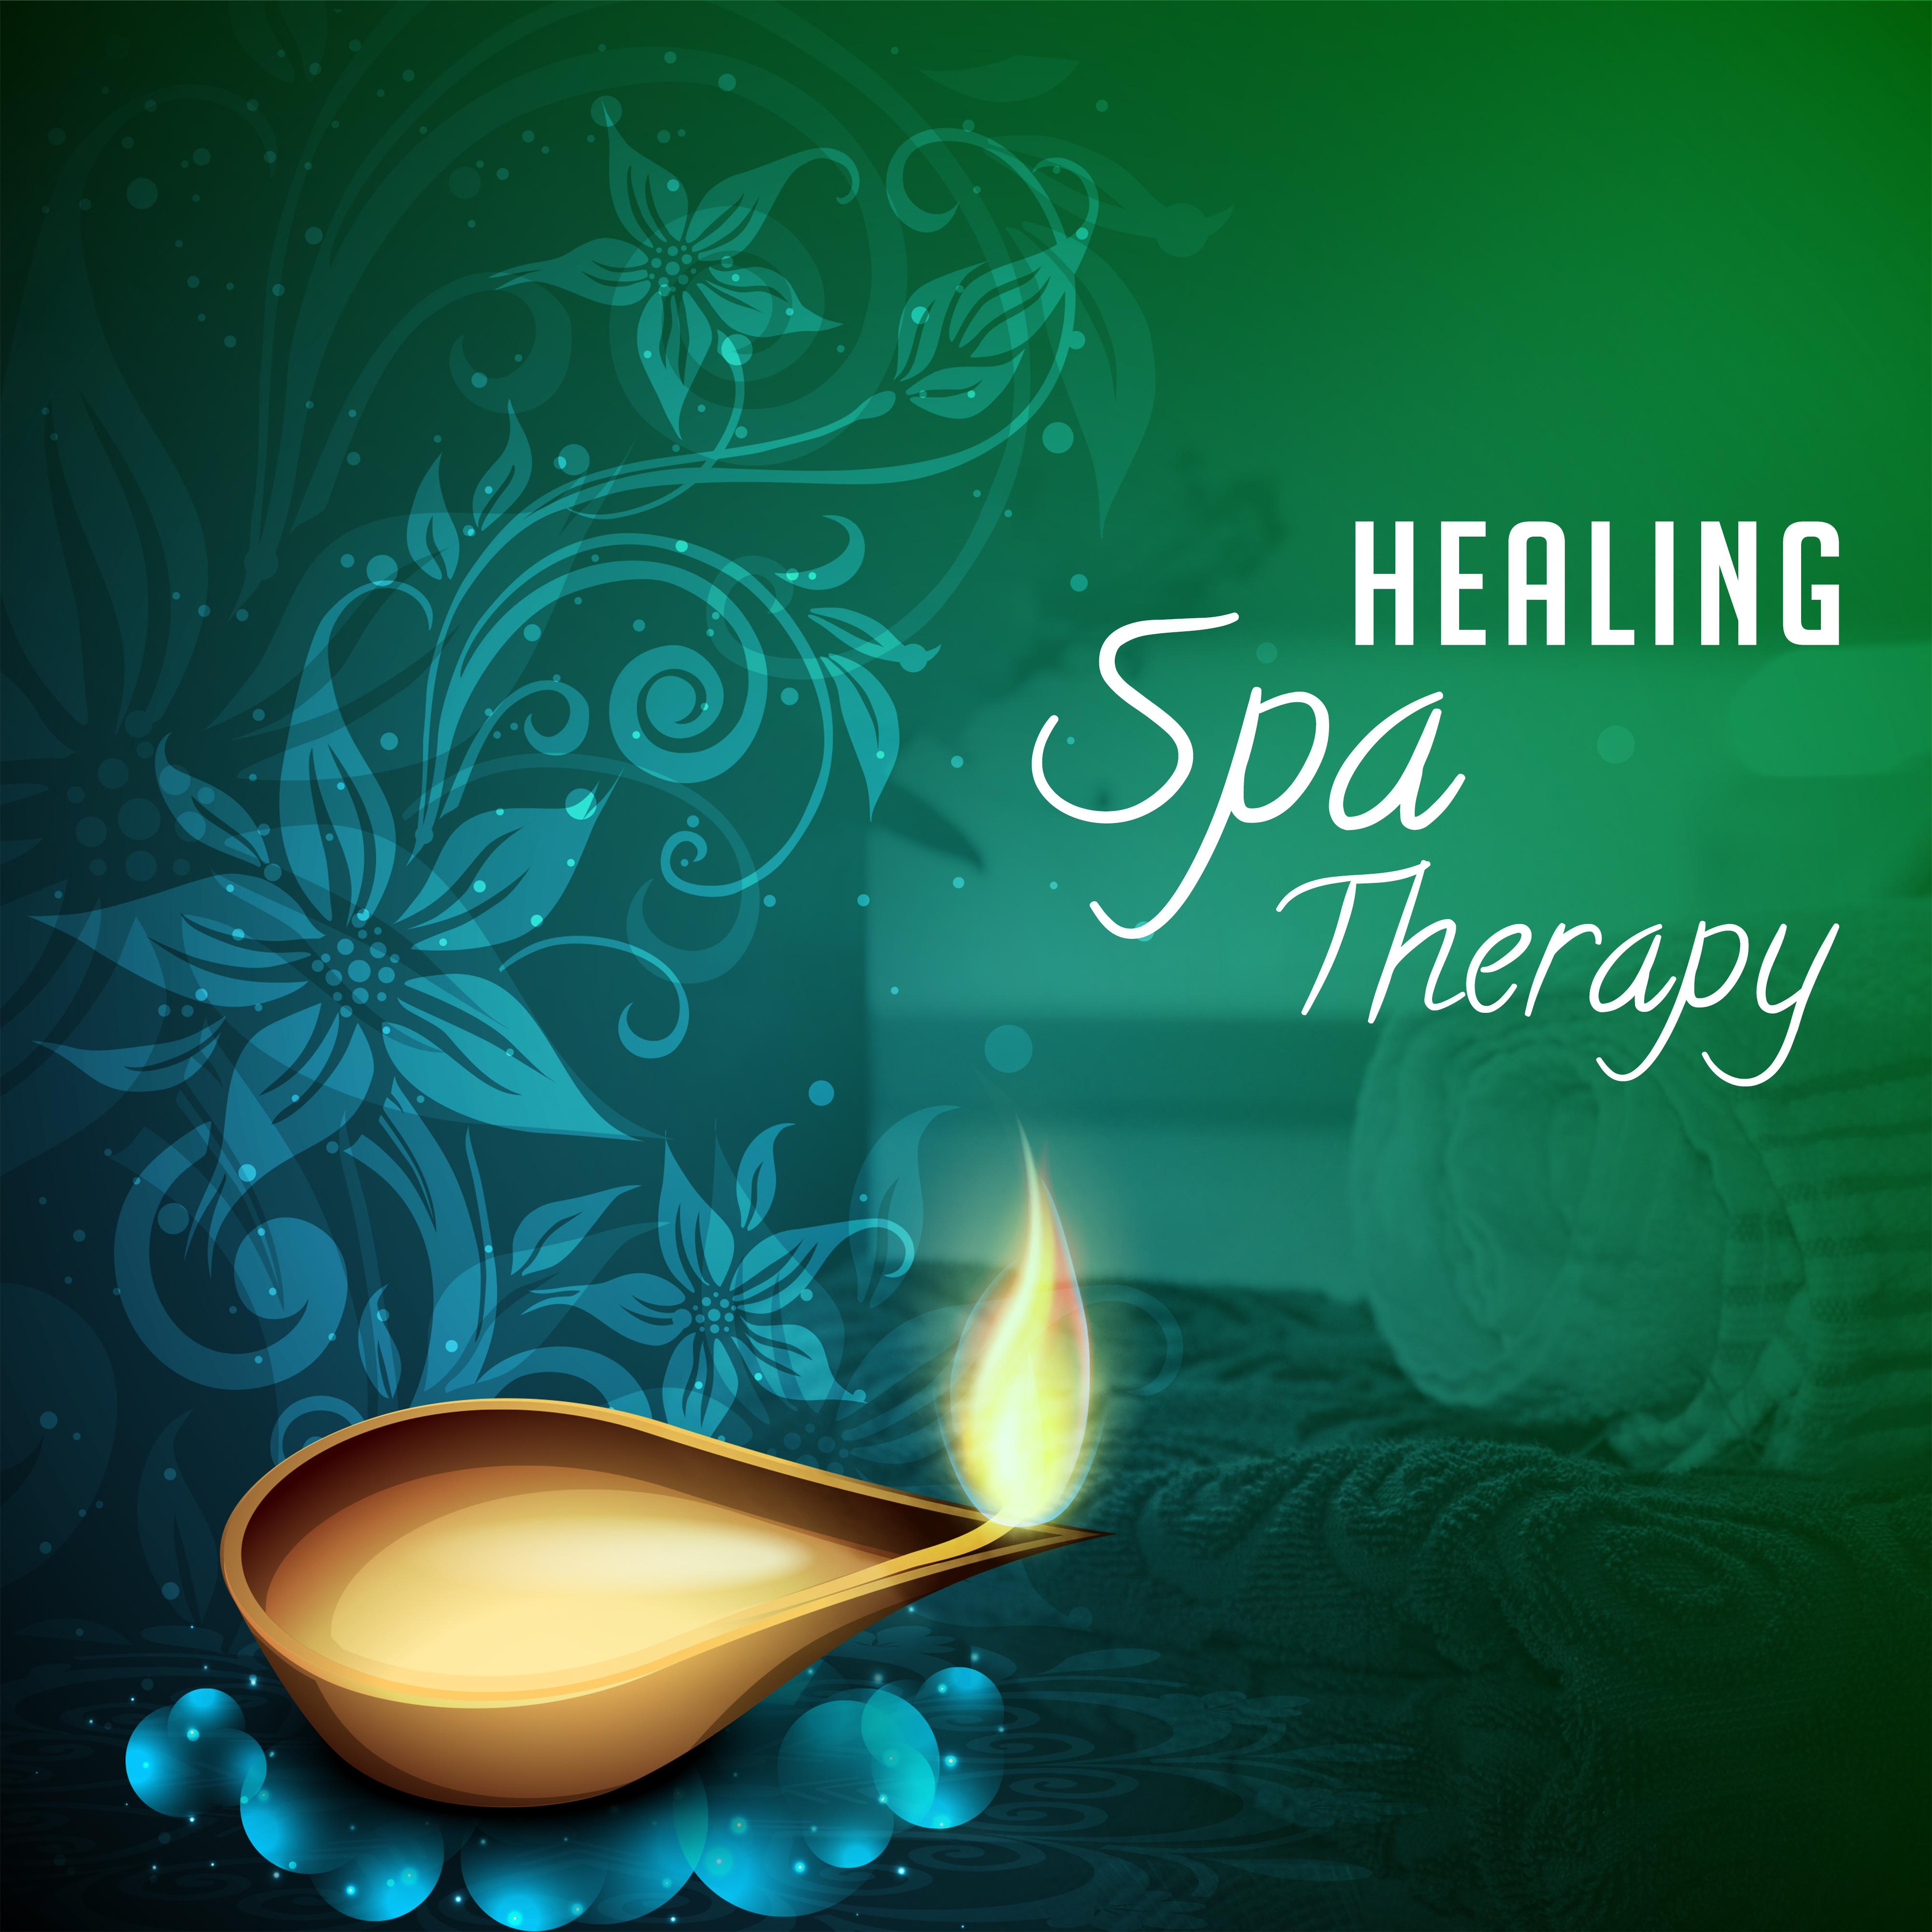 Healing Spa Therapy  Relaxing Music for Massage, Spa Treatmenets, Relief Stress, Sleep